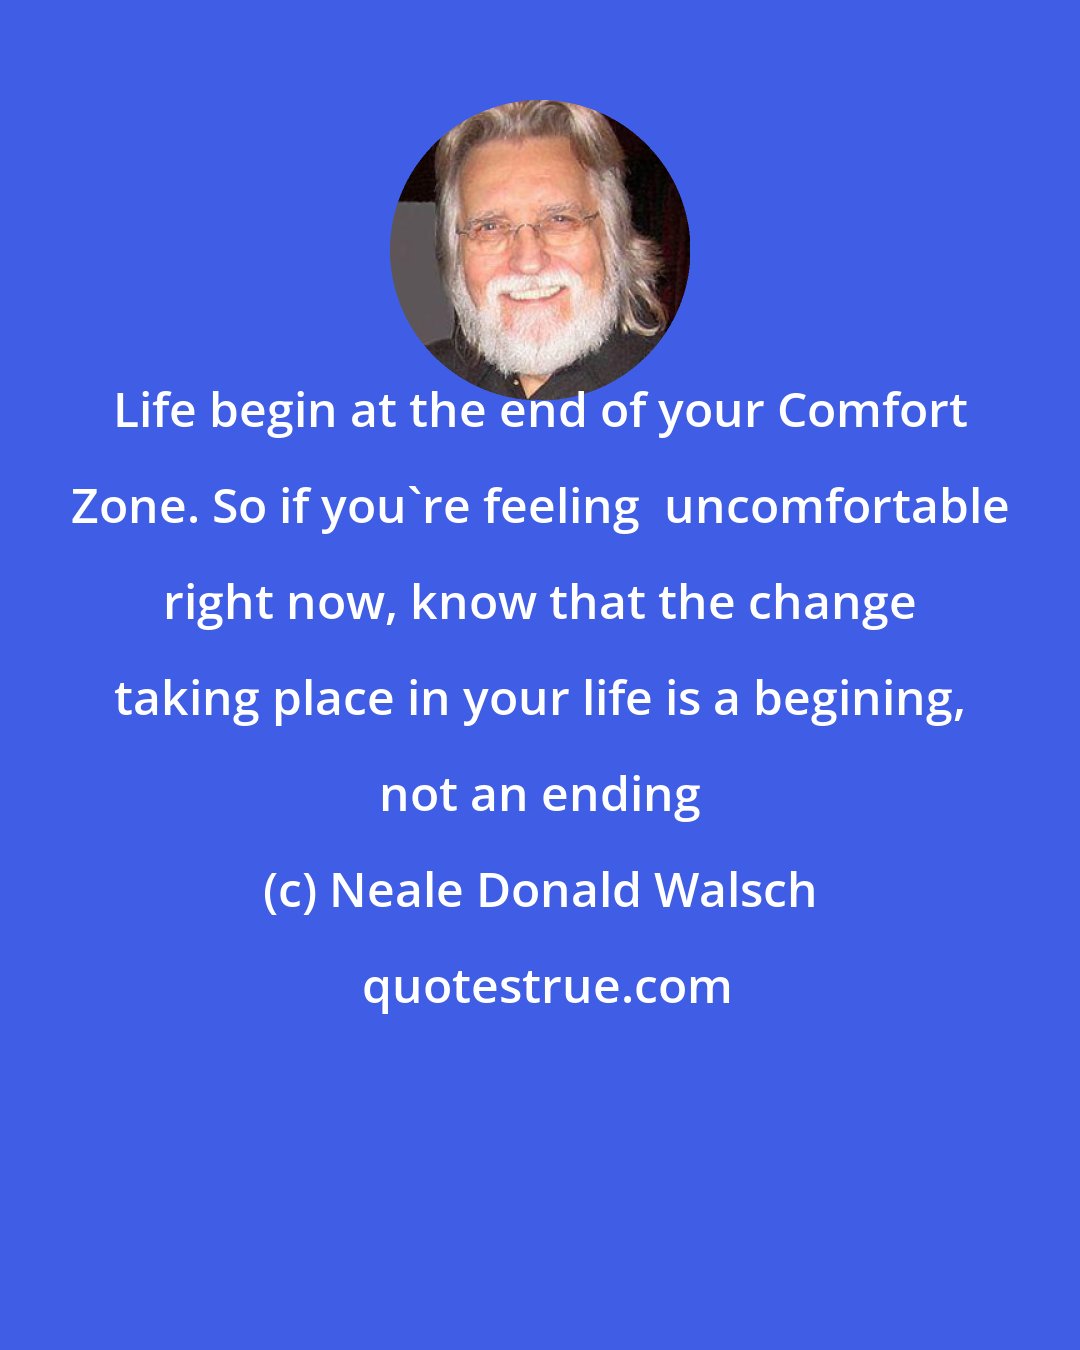 Neale Donald Walsch: Life begin at the end of your Comfort Zone. So if you`re feeling  uncomfortable right now, know that the change taking place in your life is a begining, not an ending